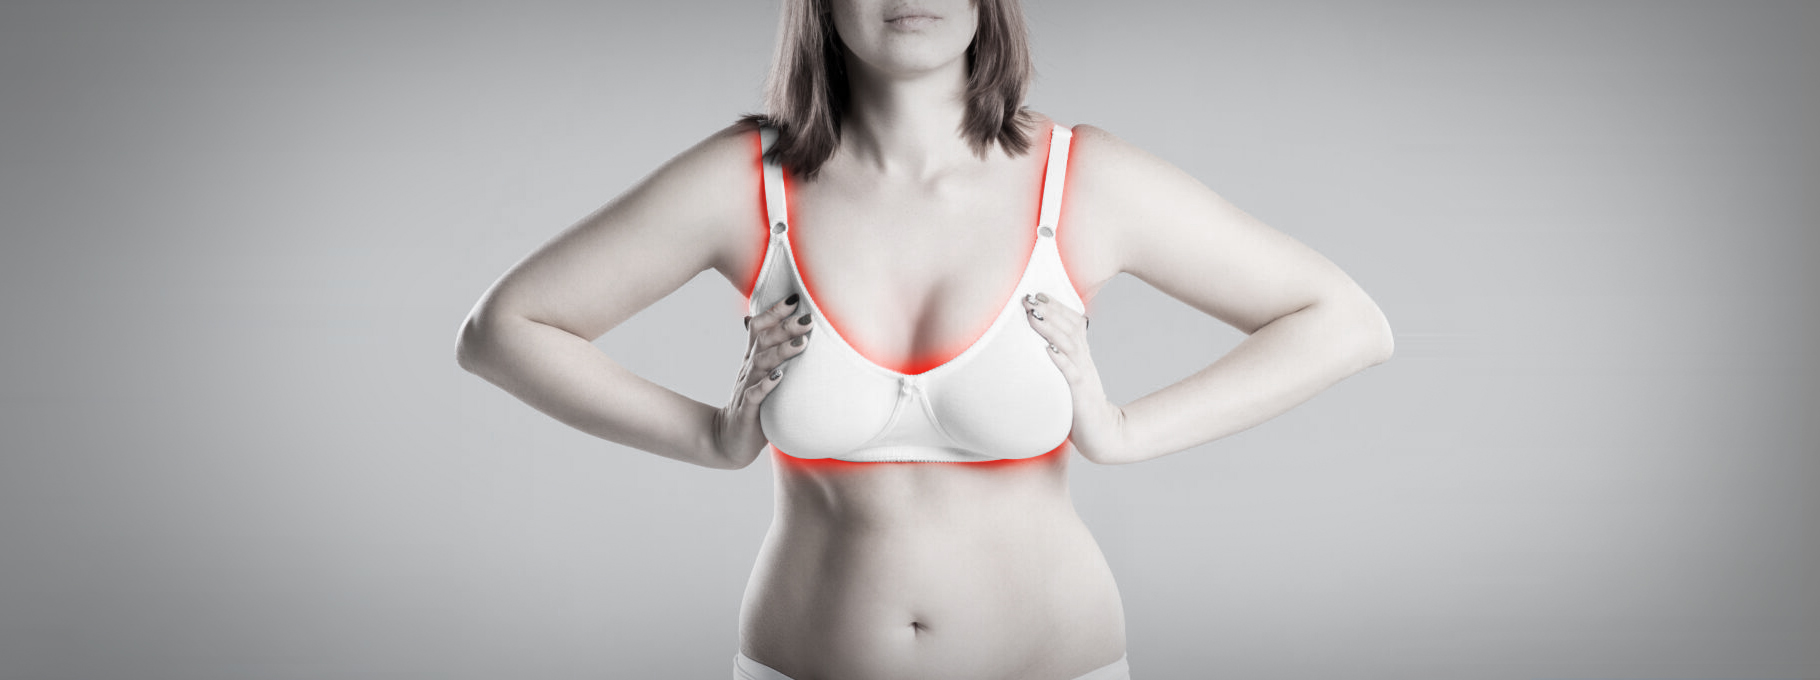 How To Heal Bra Chafing